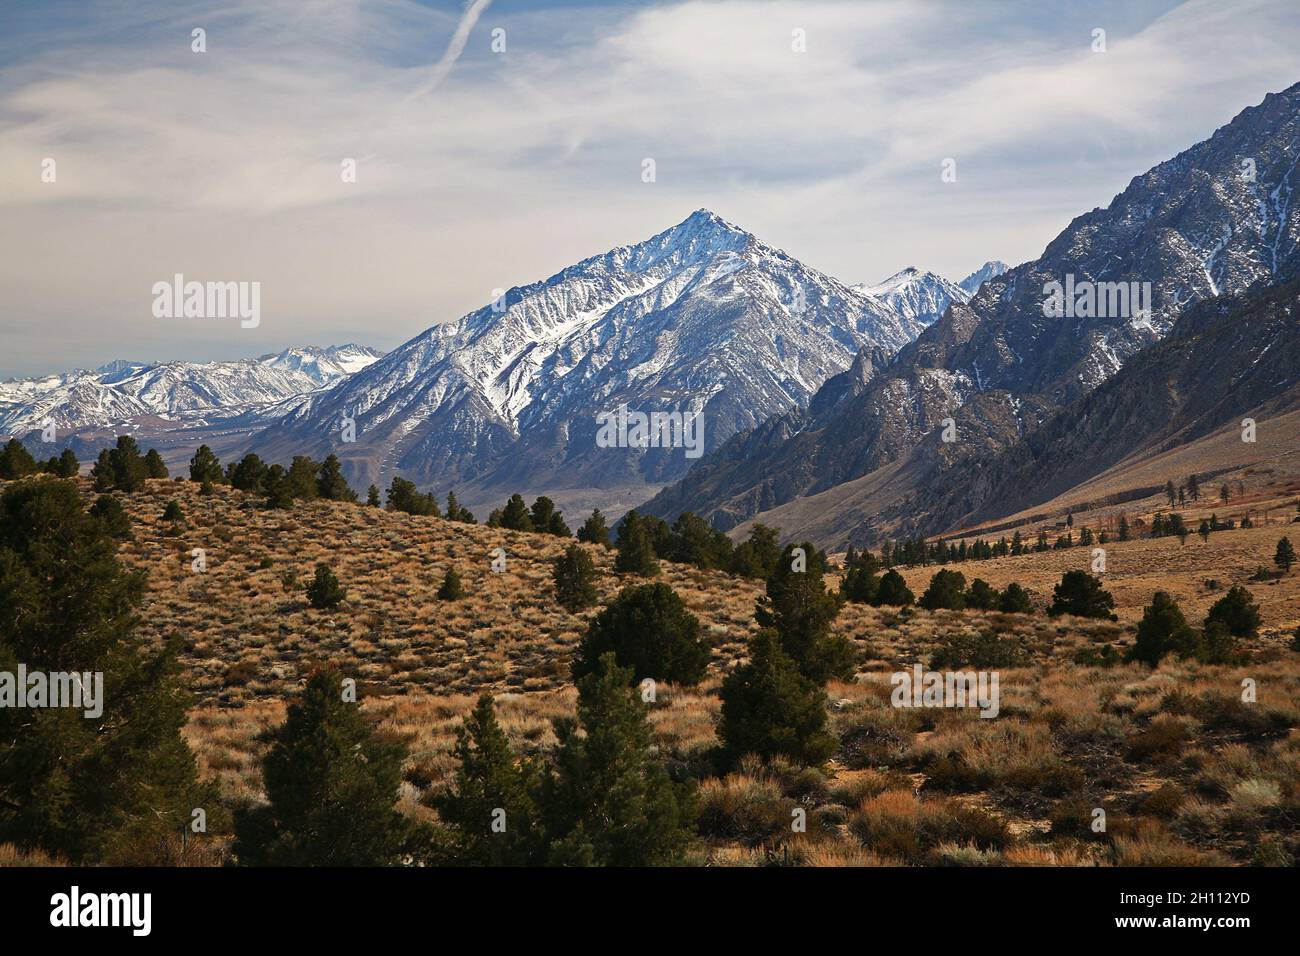 view of Sierra Nevada mountains along US highway 395 in California's high desert Stock Photo